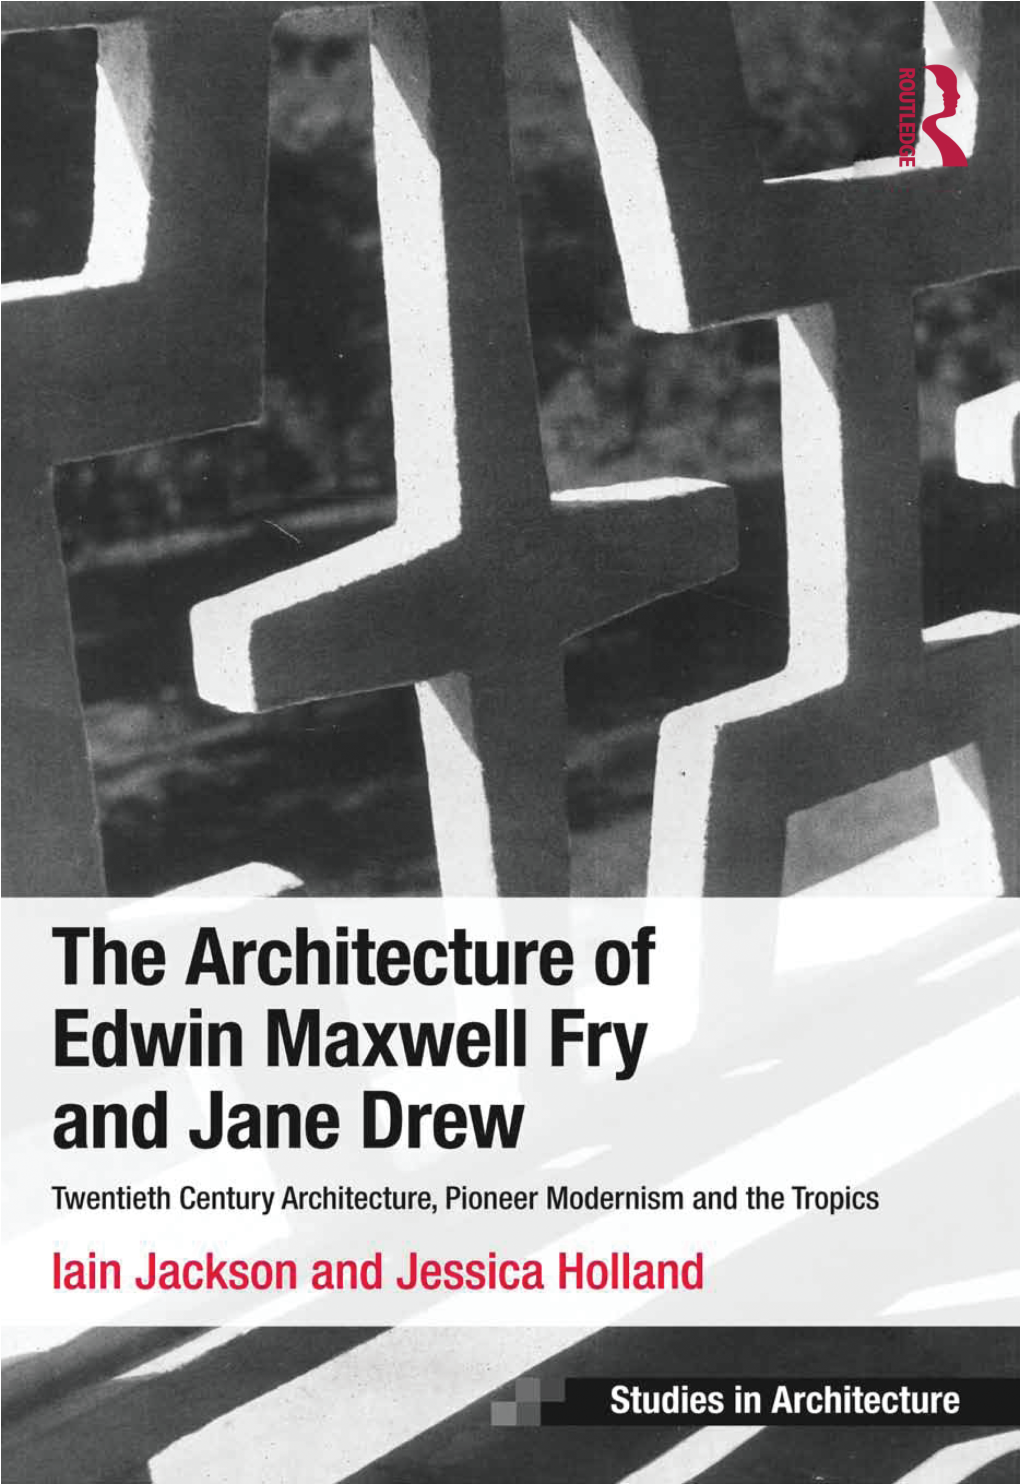 THE Architecture of EDWIN Maxwell FRY and Jane DREW Ashgate Studies in Architecture Series